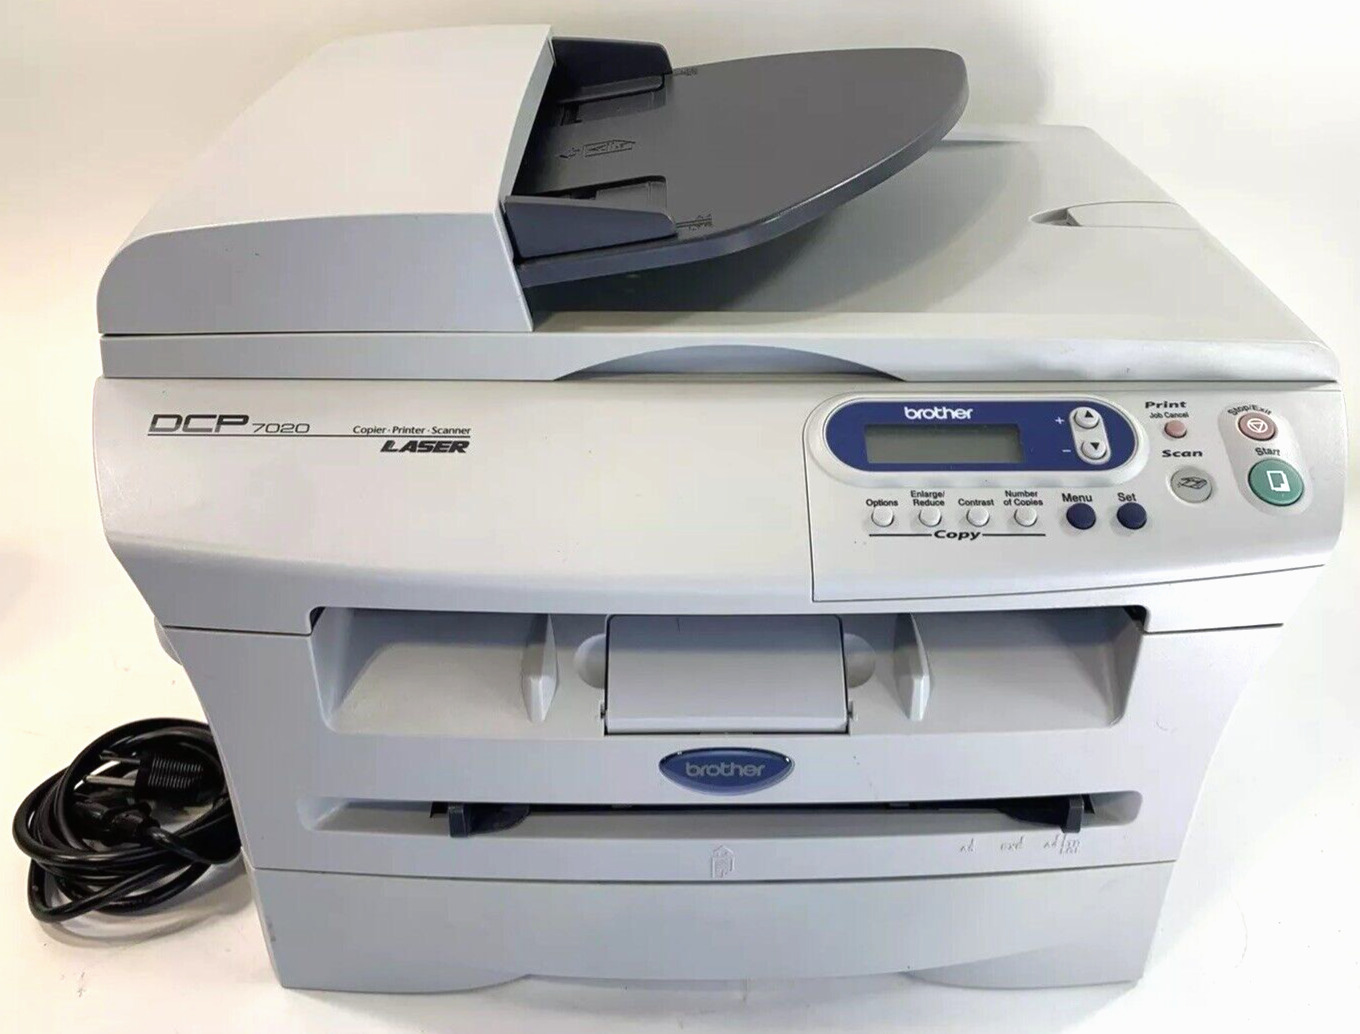 Brother DCP-7020 All-In-One Laser Printer - Tested And Working